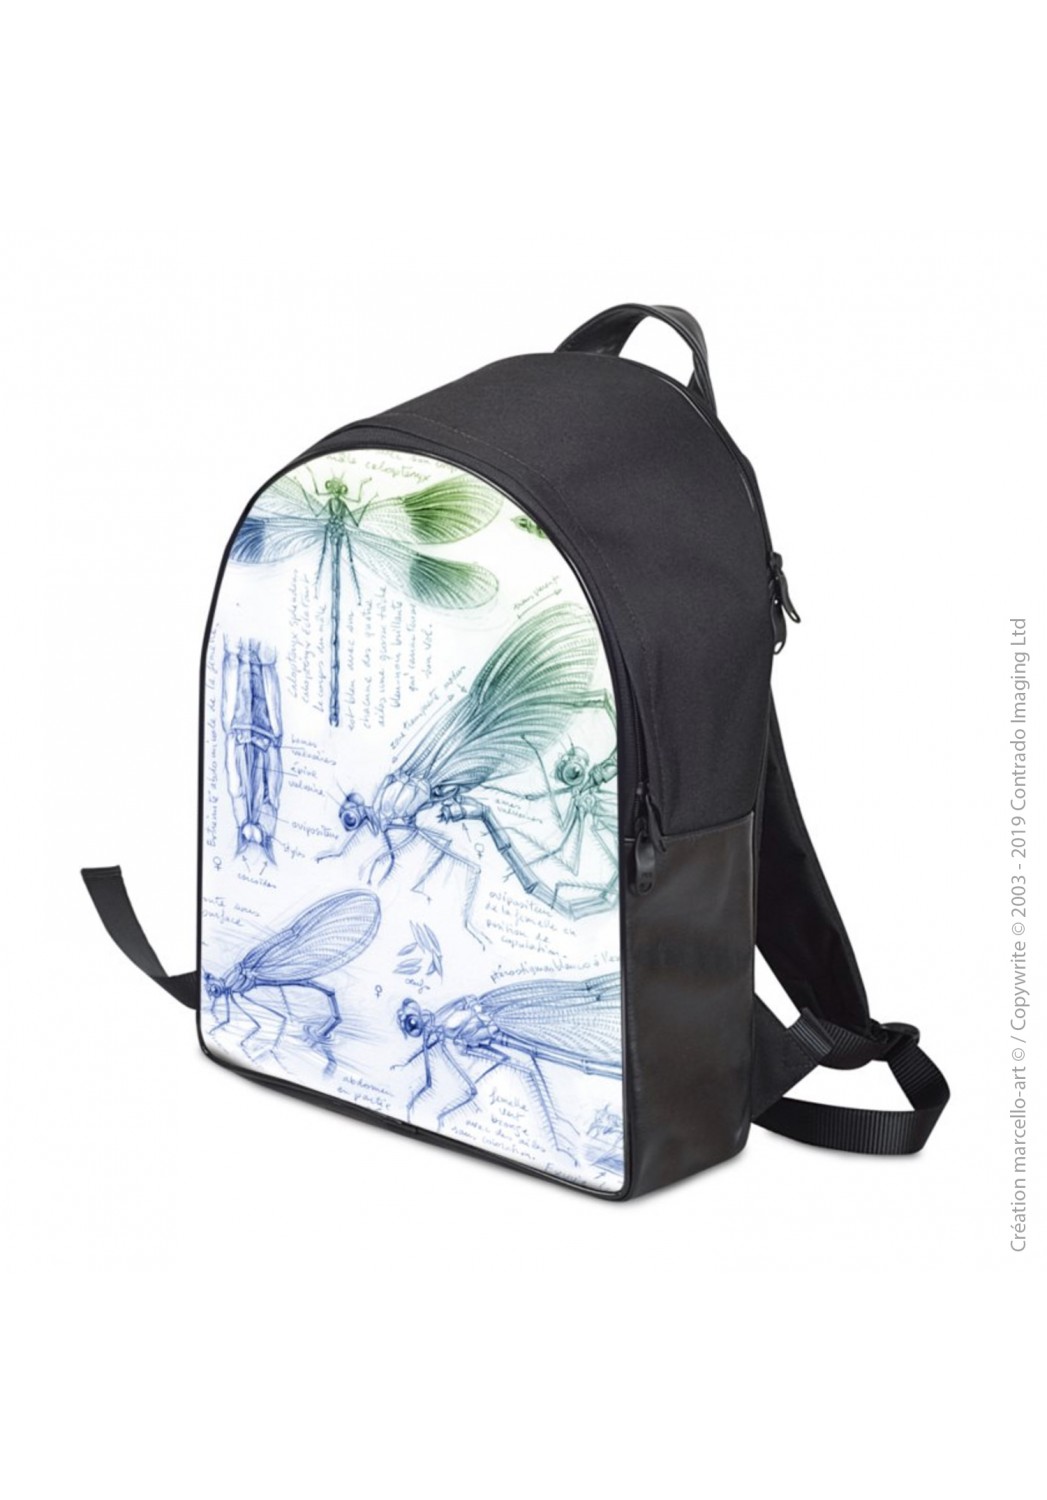 Marcello-art: Fashion accessory Backpack 255 calopteryx